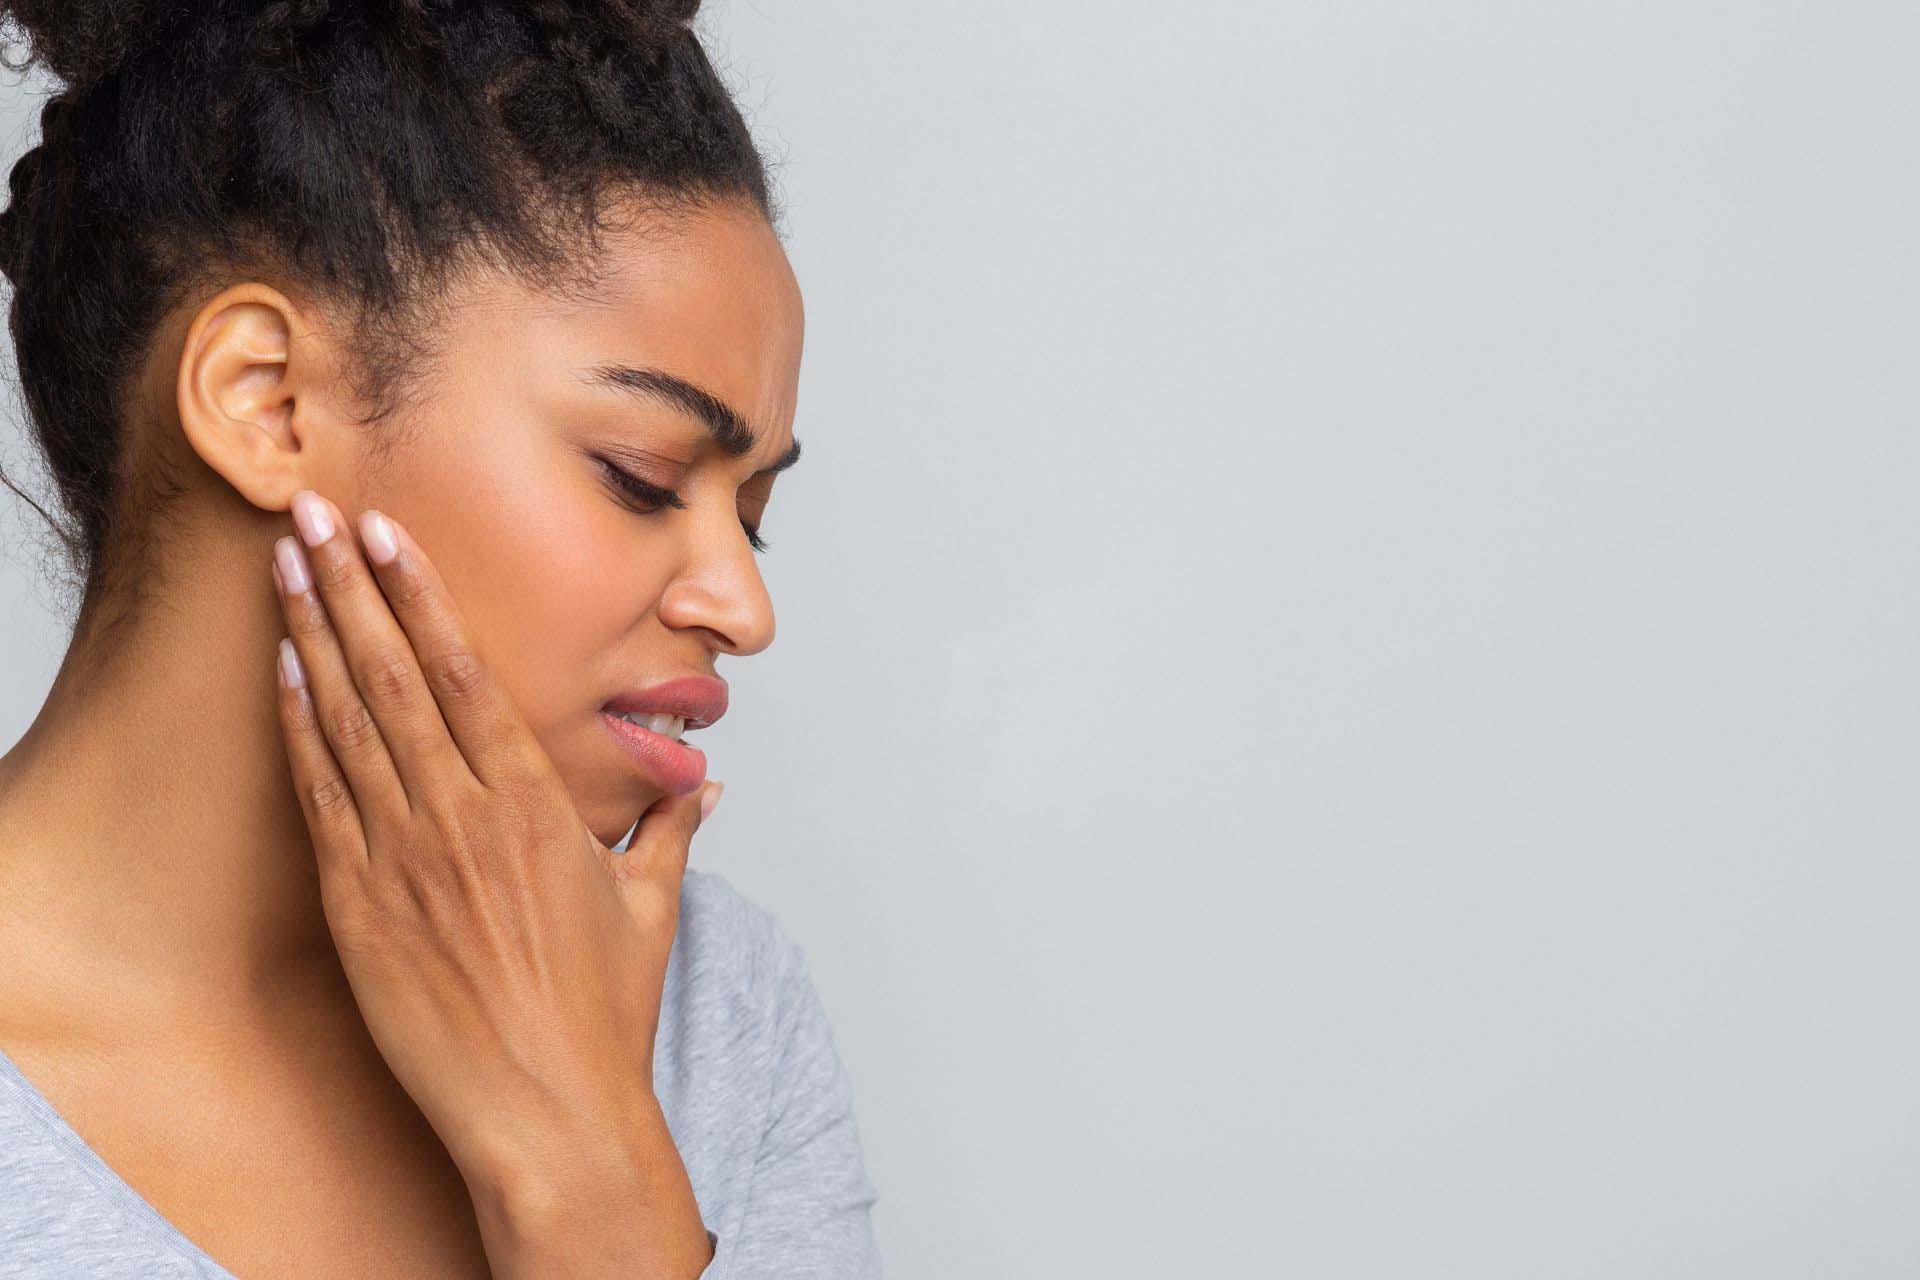 Woman holding jaw due to joint pain by her ears as she sees a TMJ specialist, Dr. Hakim near Toluca Lake, Los Angeles, who is treating TMJ for her.